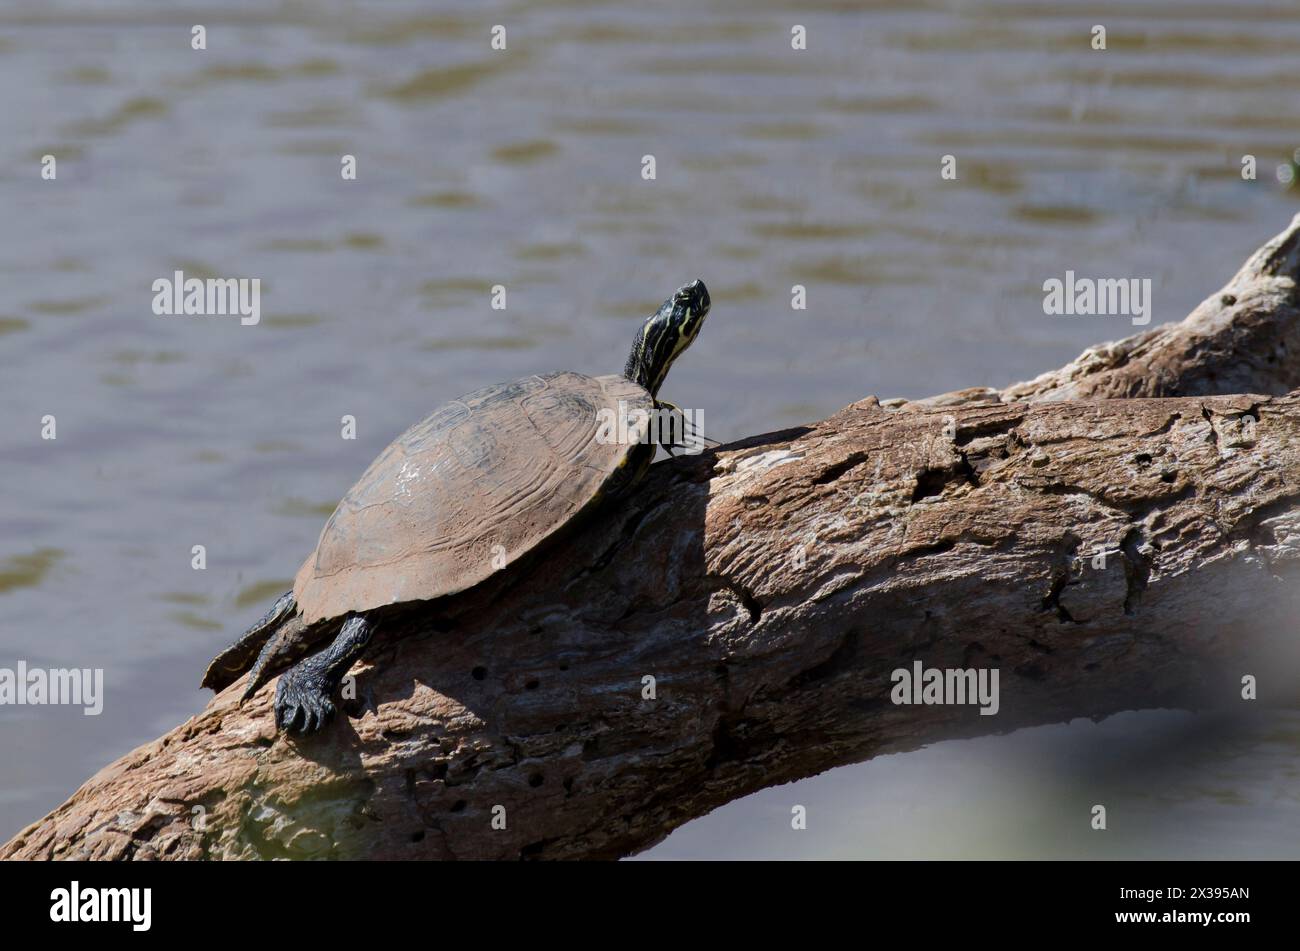 Eastern River Cooter, Pseudemys concinna concinna, basking on log Stock Photo